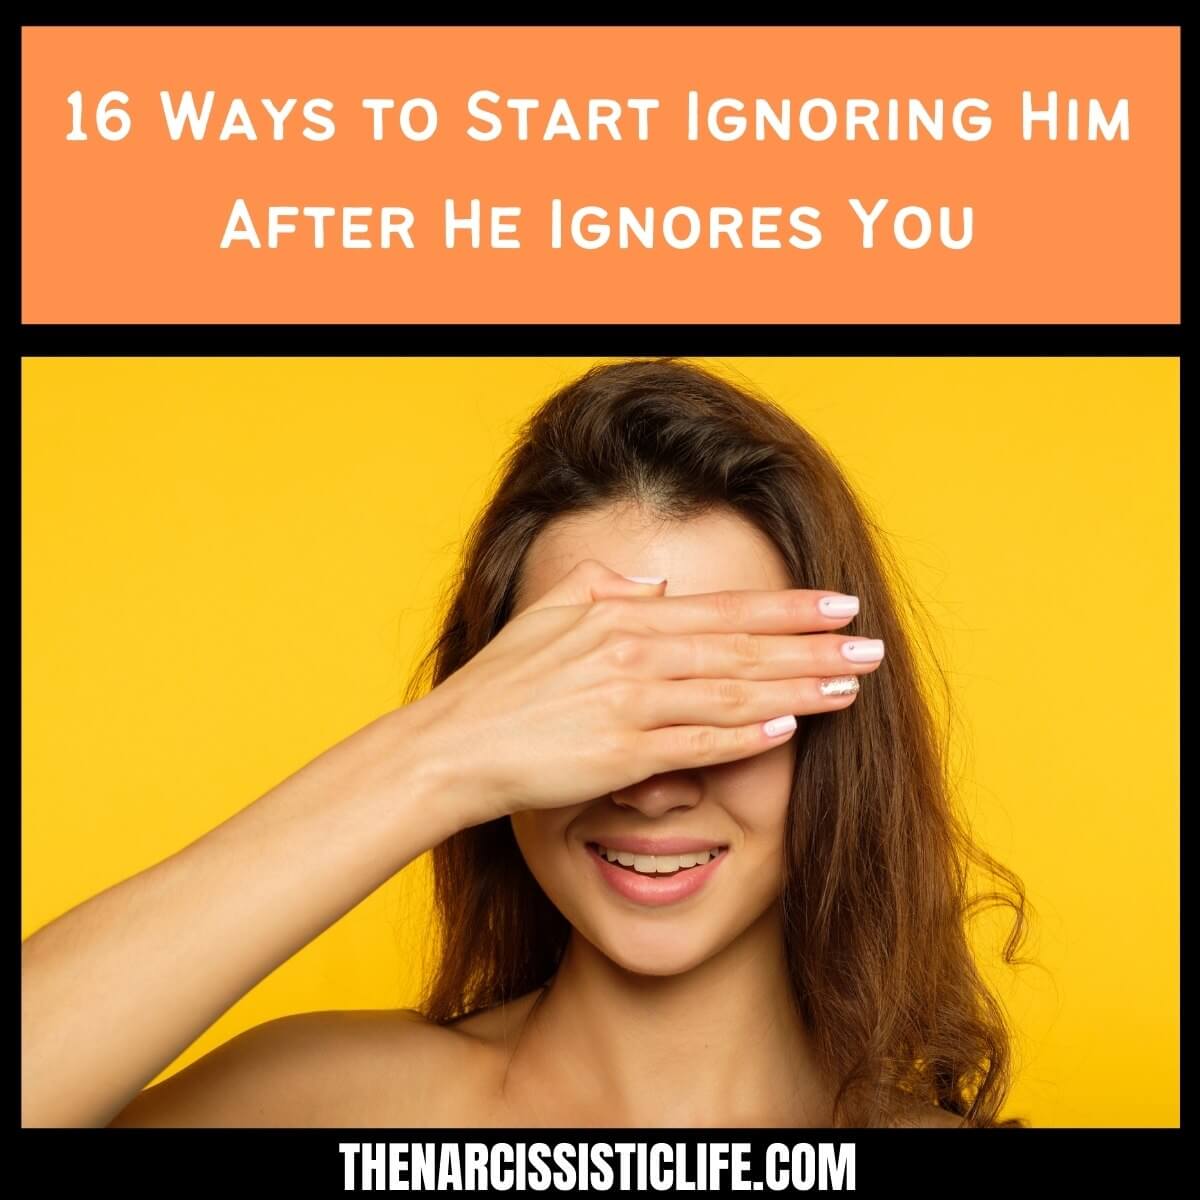 16 Ways to Start Ignoring Him After He Ignores You